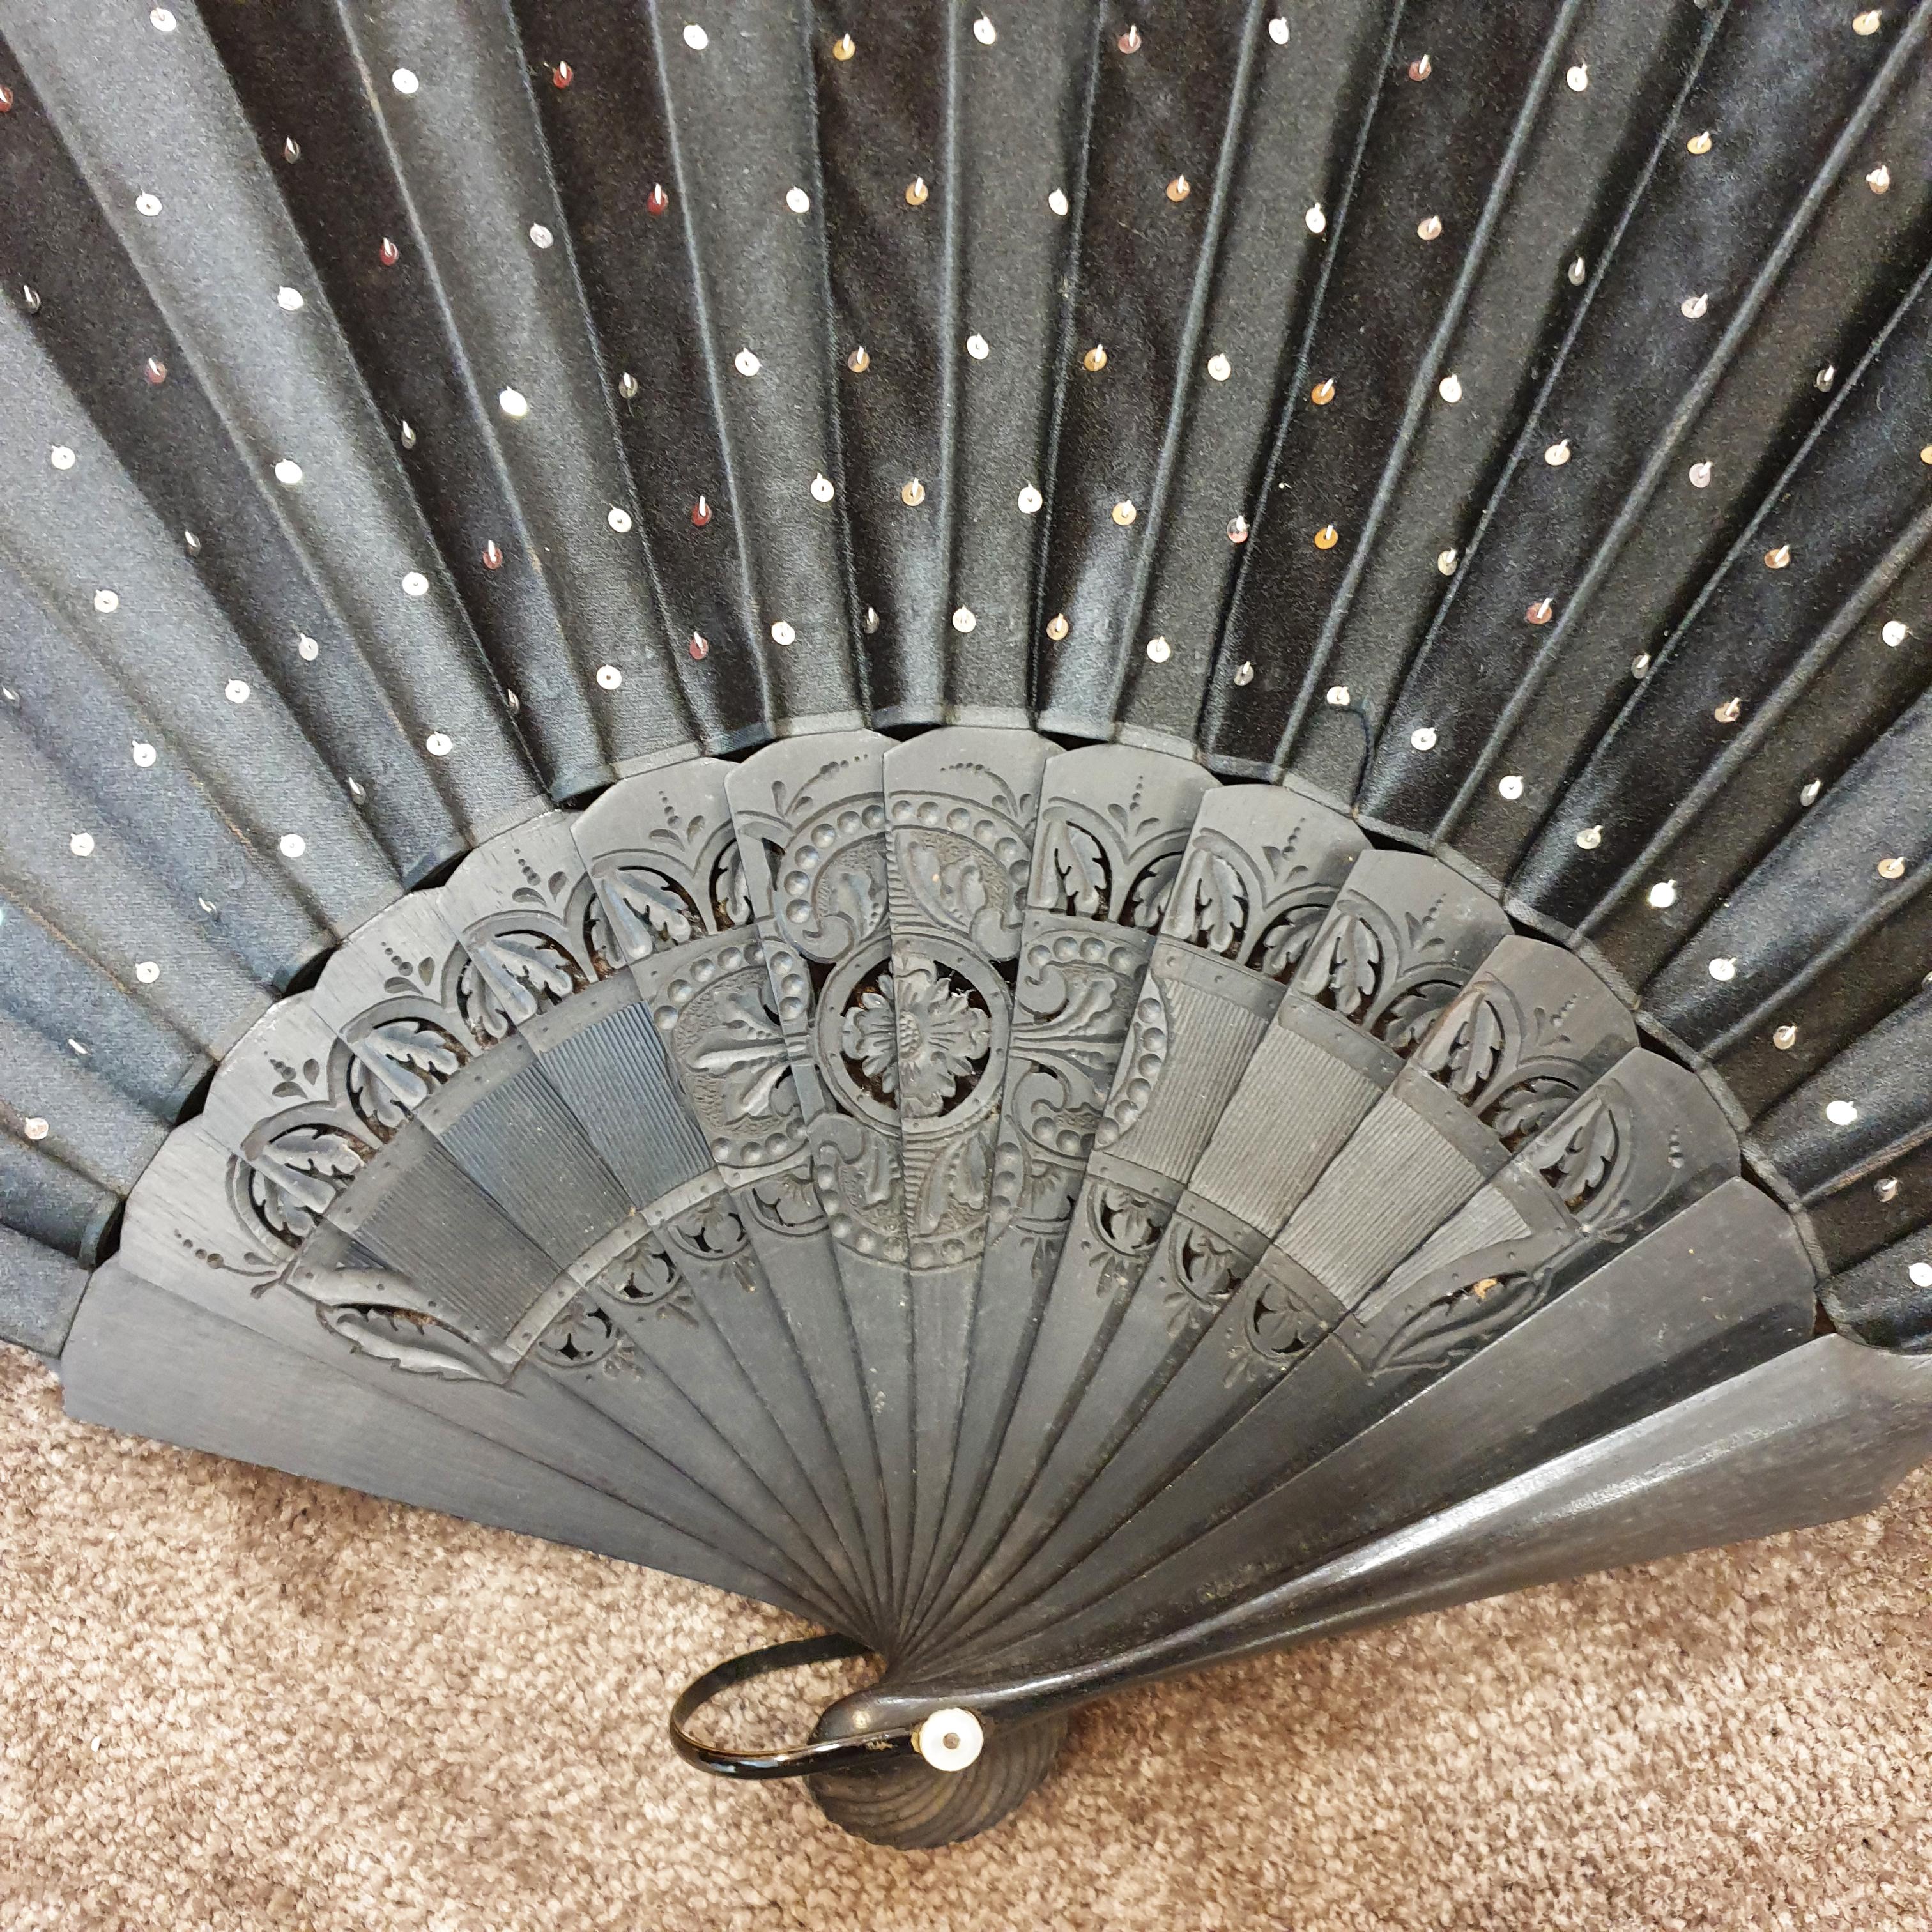 Art Nouveau 1890 Flamenco Pericon Fan Open 66cm X 34cm / 25,98in x 13,38in
Ebonized wood. Black with rhinestones , ideal for cocktails and galas, for dancing and for breazing in hot weather. 
Perfect Condition 
Good quality wood and cloth
Great